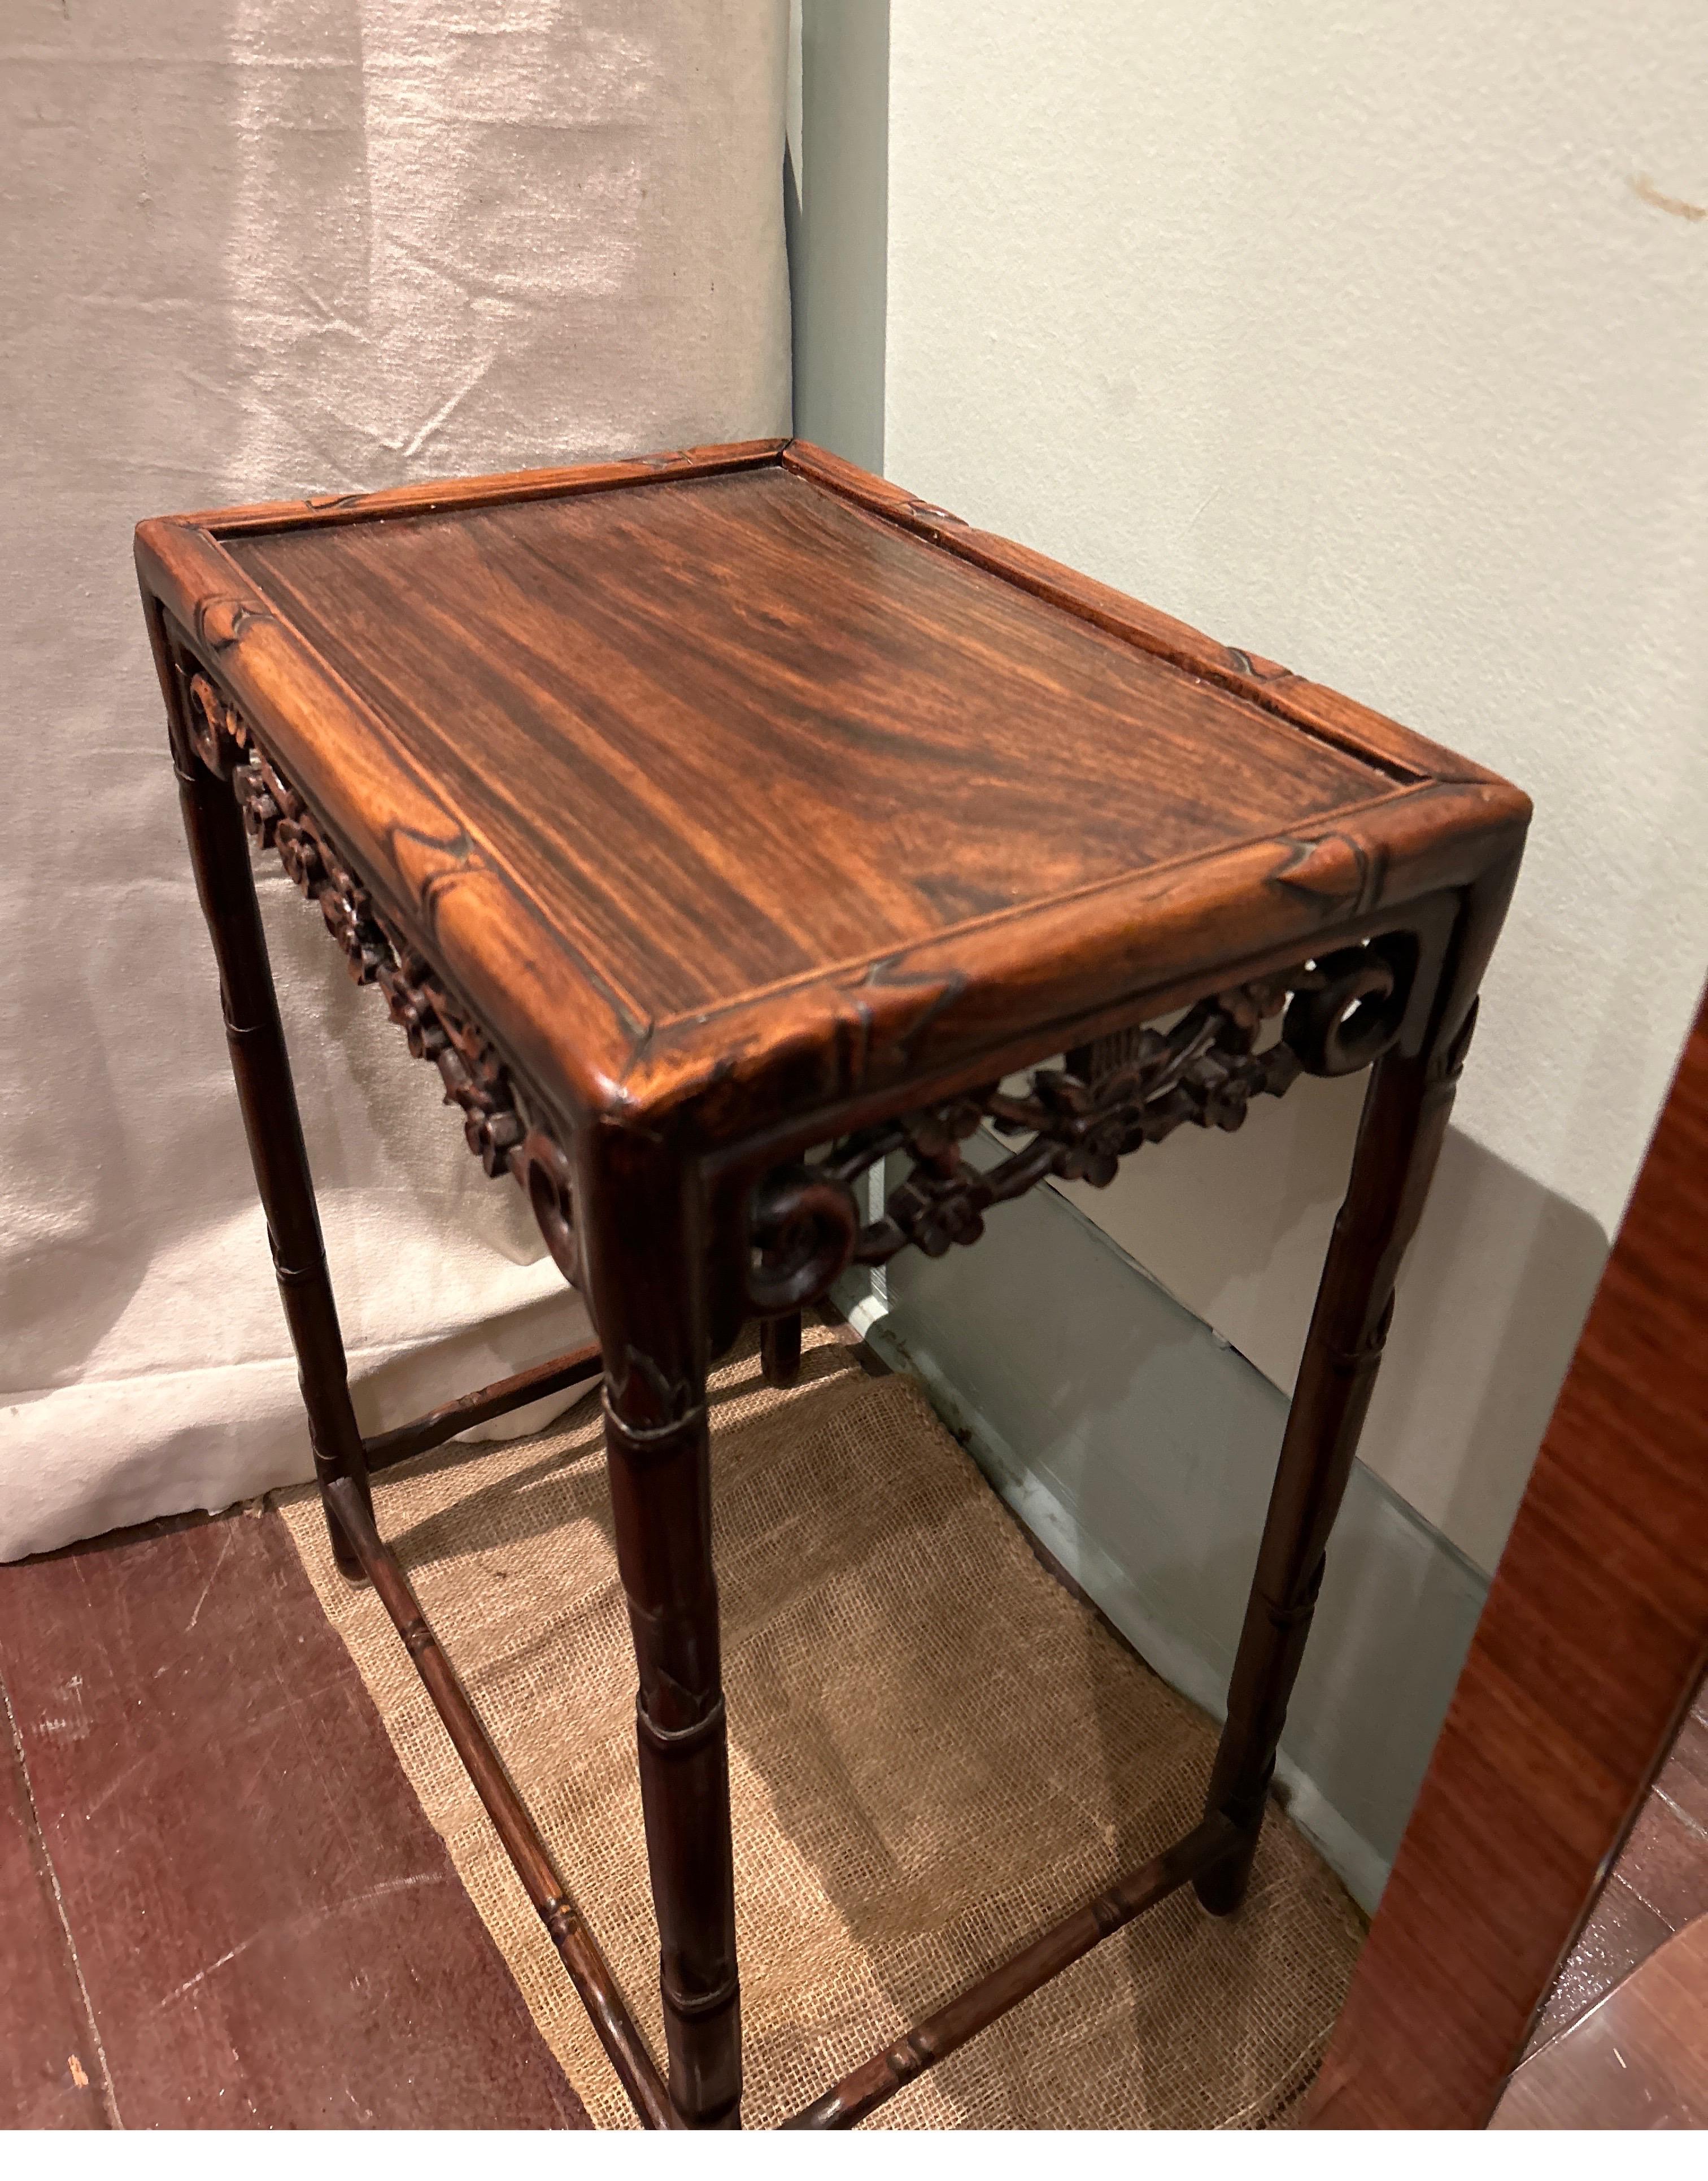 Late Qing Dynasty Rosewood Export Side Table Carved With Floral Bamboo Theme In Good Condition For Sale In Vancouver, British Columbia